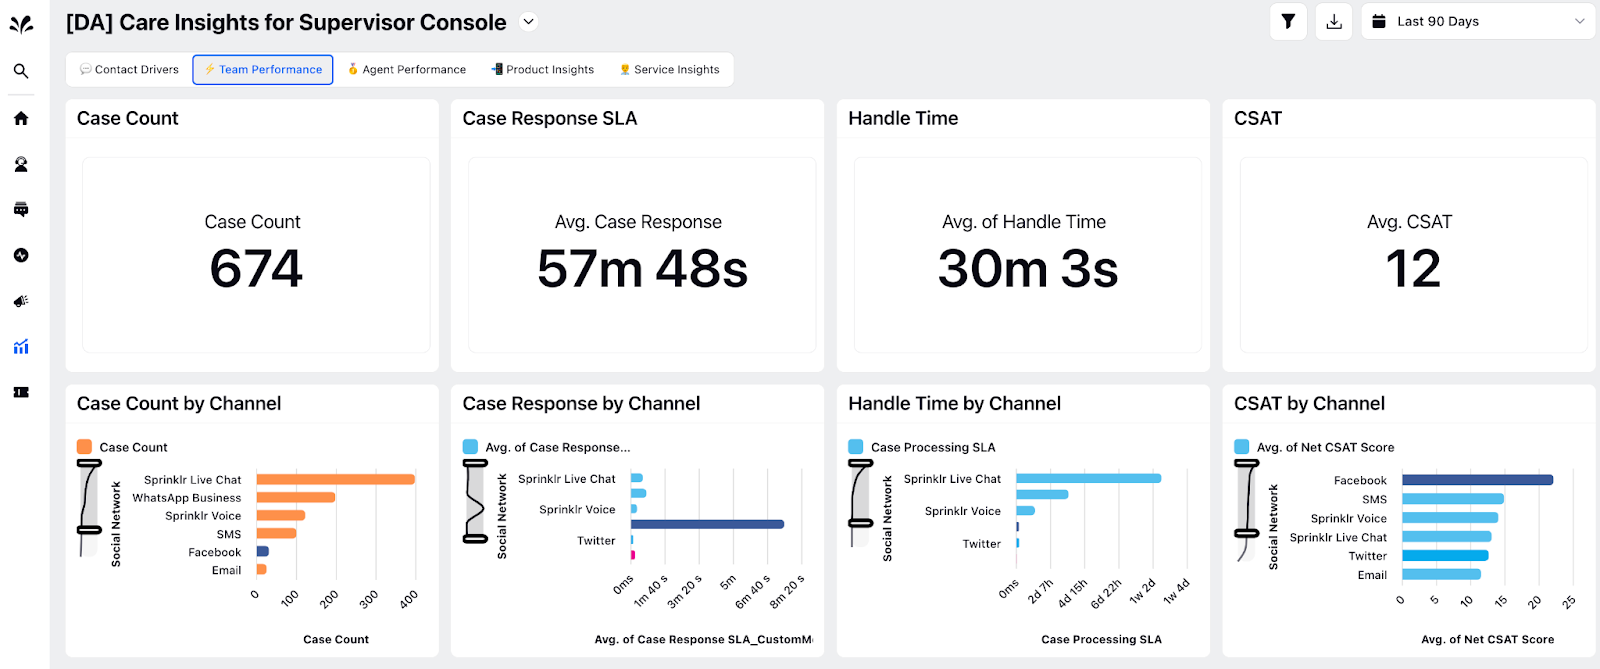 A customer service report/dashboard from Sprinklr Service